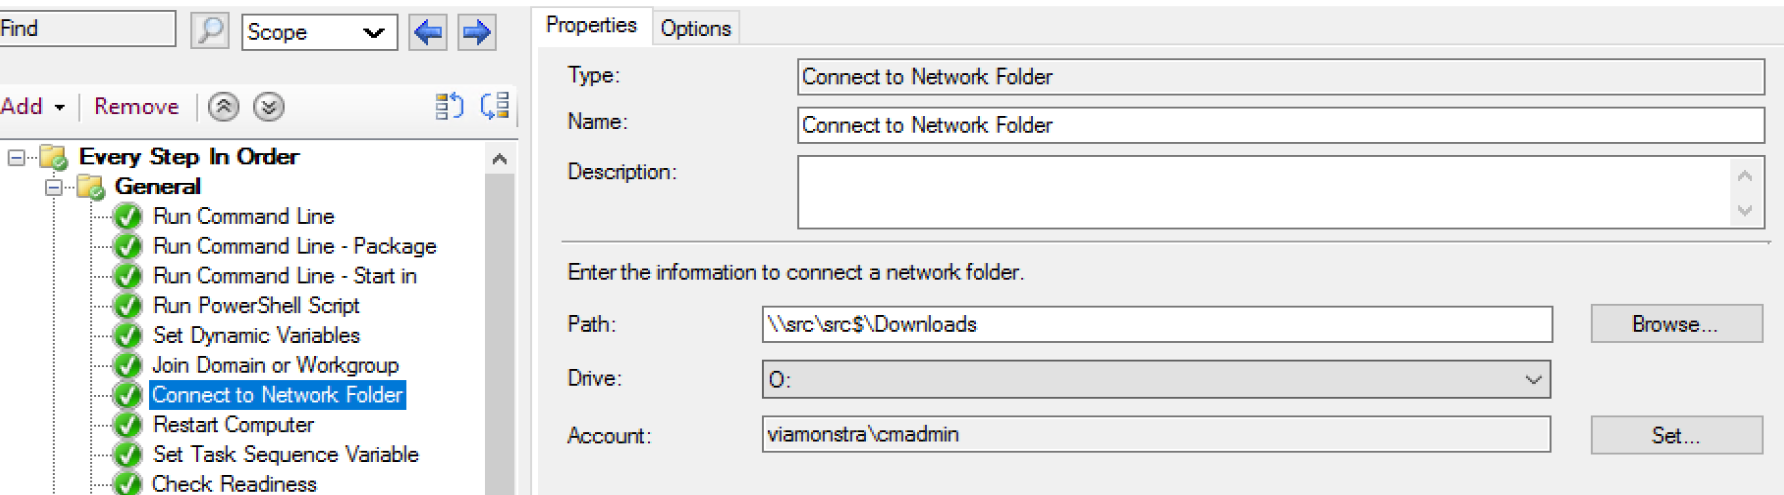 Connect to Network Folder 1